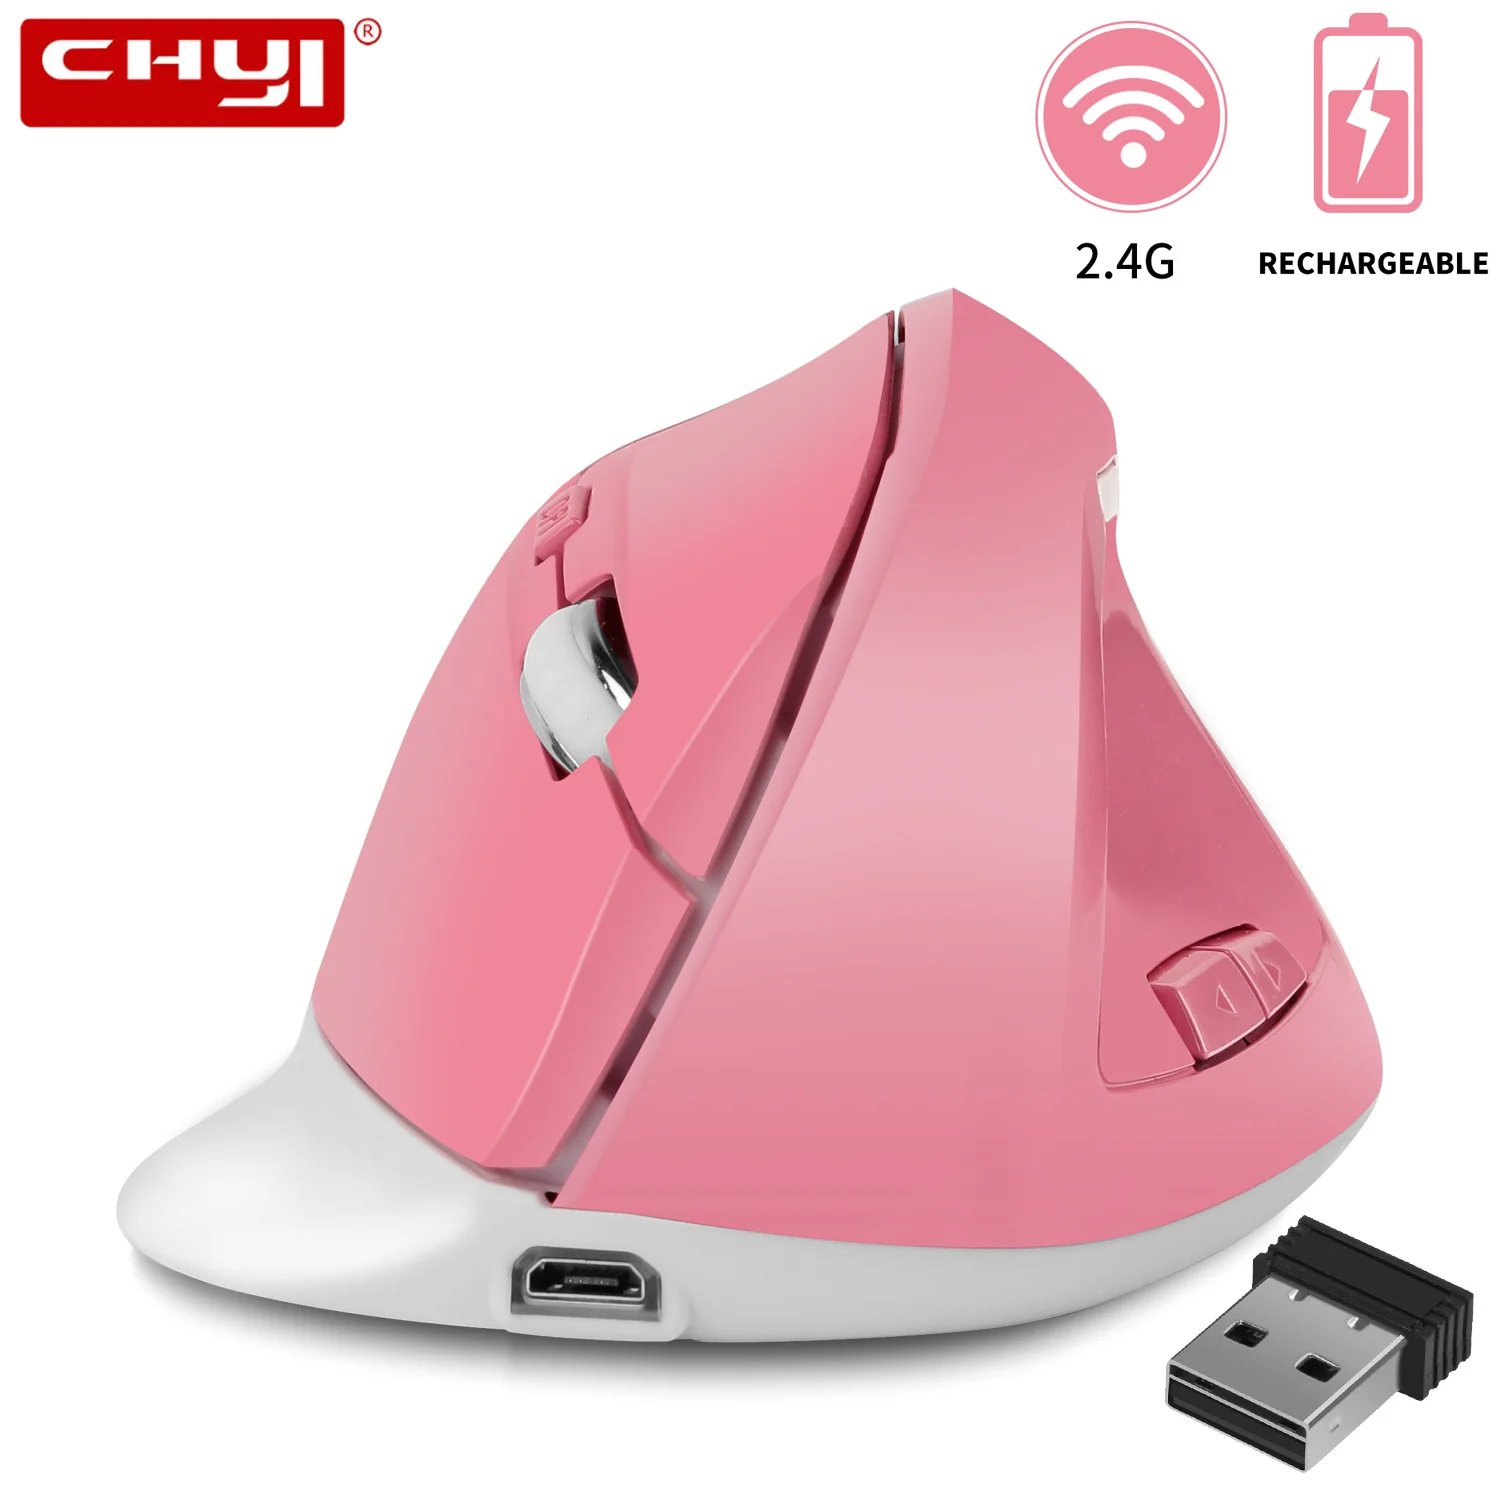 

CHYI Wireless Vertical Mouse 2.4Ghz Rechargeable Ergonomic Optical 1600 DPI Pink Girl Computer Mause 3D Gamer Mice For Laptop